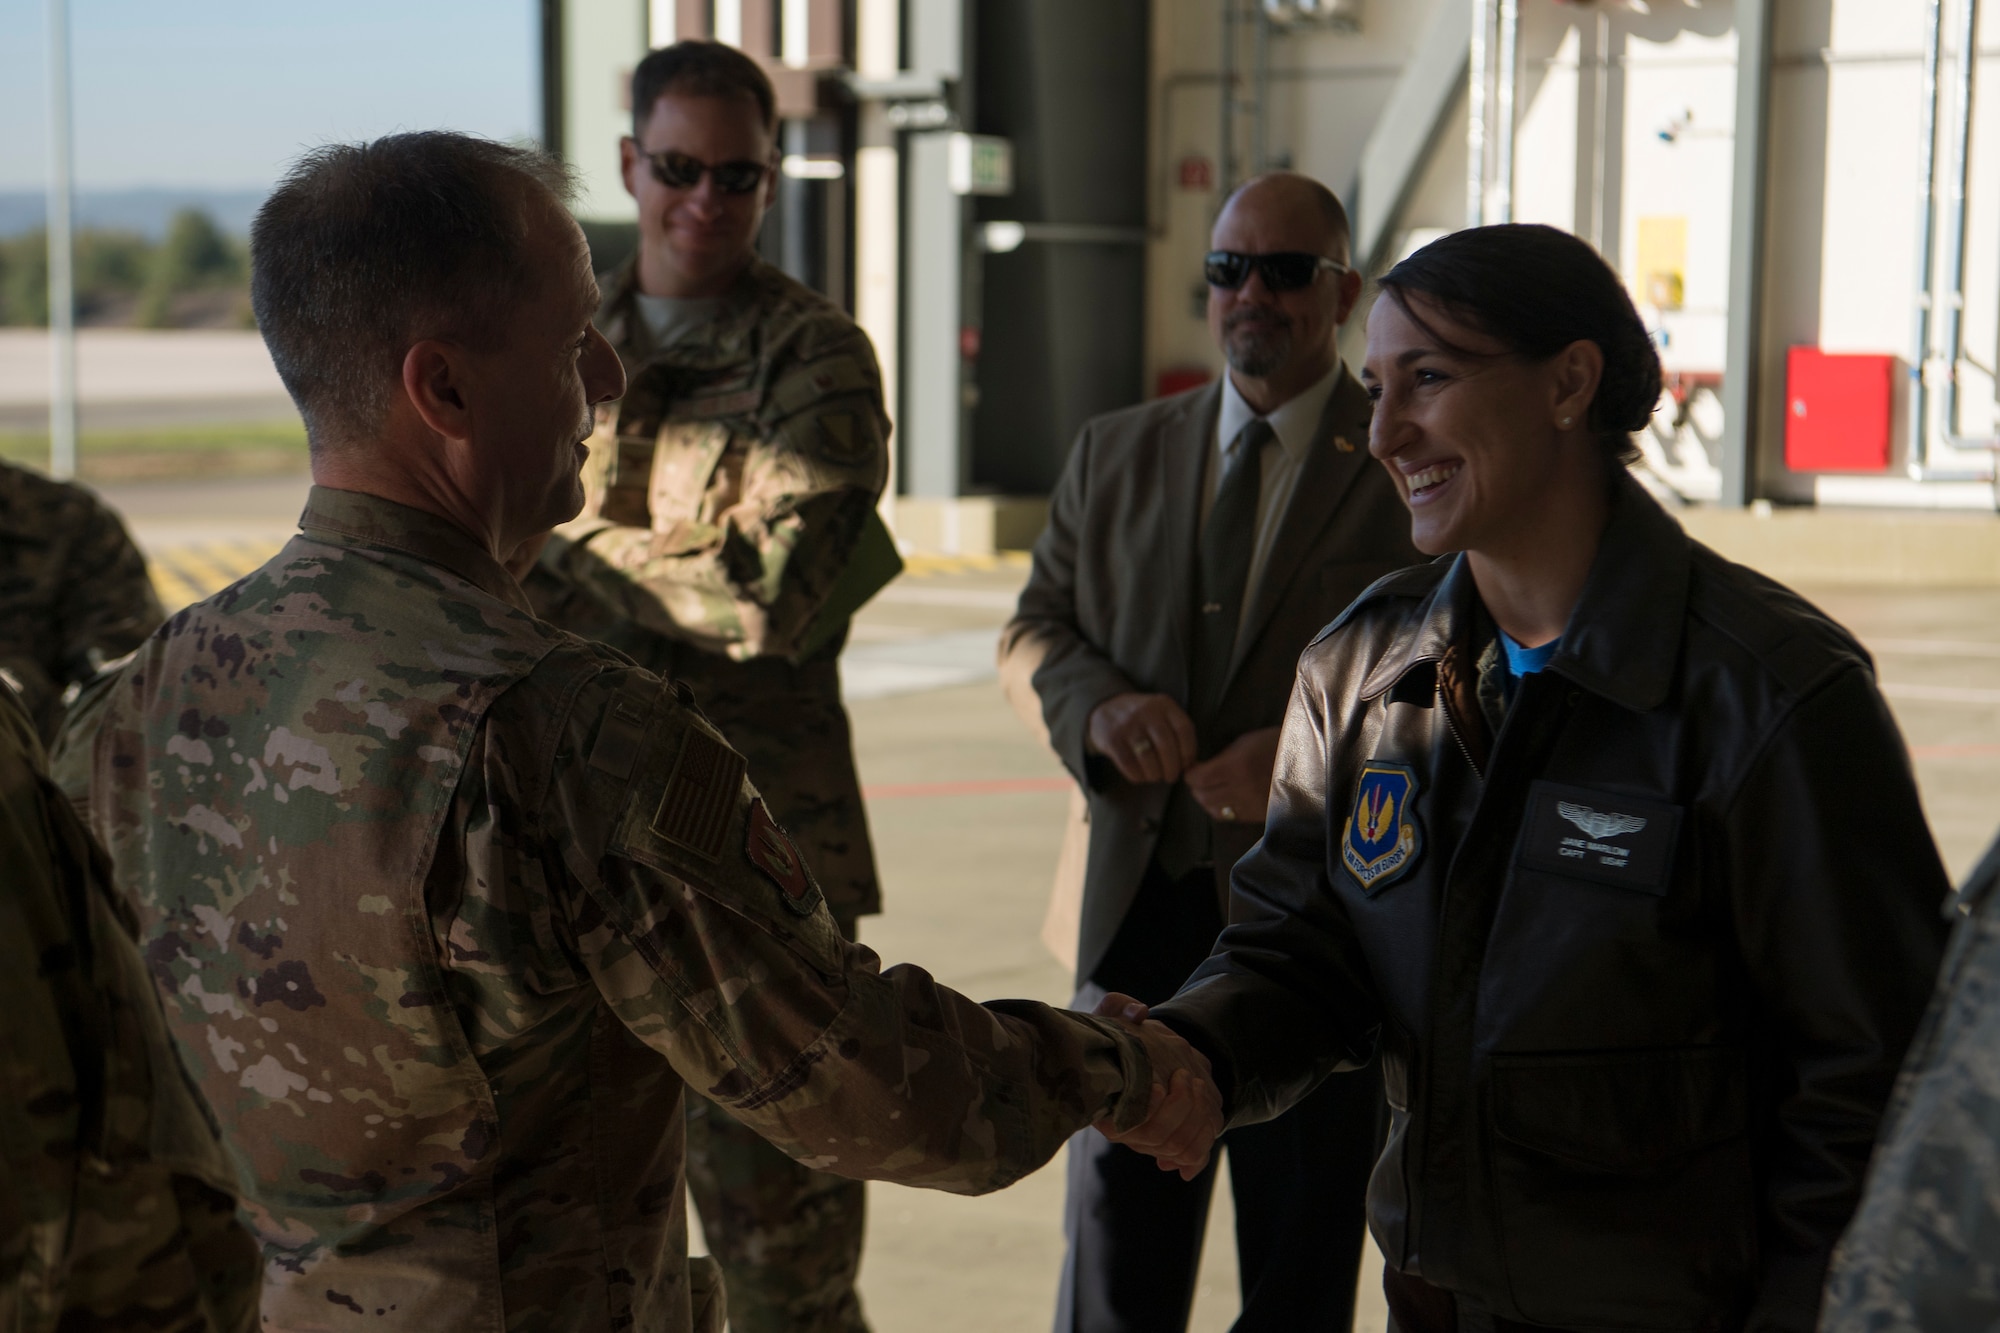 U.S. Air Force Maj. Gen. John Wood, Third Air Force commander, coins Capt. Jane Marlow, 37th Airlift Squadron tactics officer, during an immersion tour of the 86th Airlift Wing Oct. 5, 2018, at Ramstein Air Base, Germany. Marlow spoke about the capabilities of the C-130J Super Hercules mission across Europe. (U.S. Air Force photo by Senior Airman Devin M. Rumbaugh)